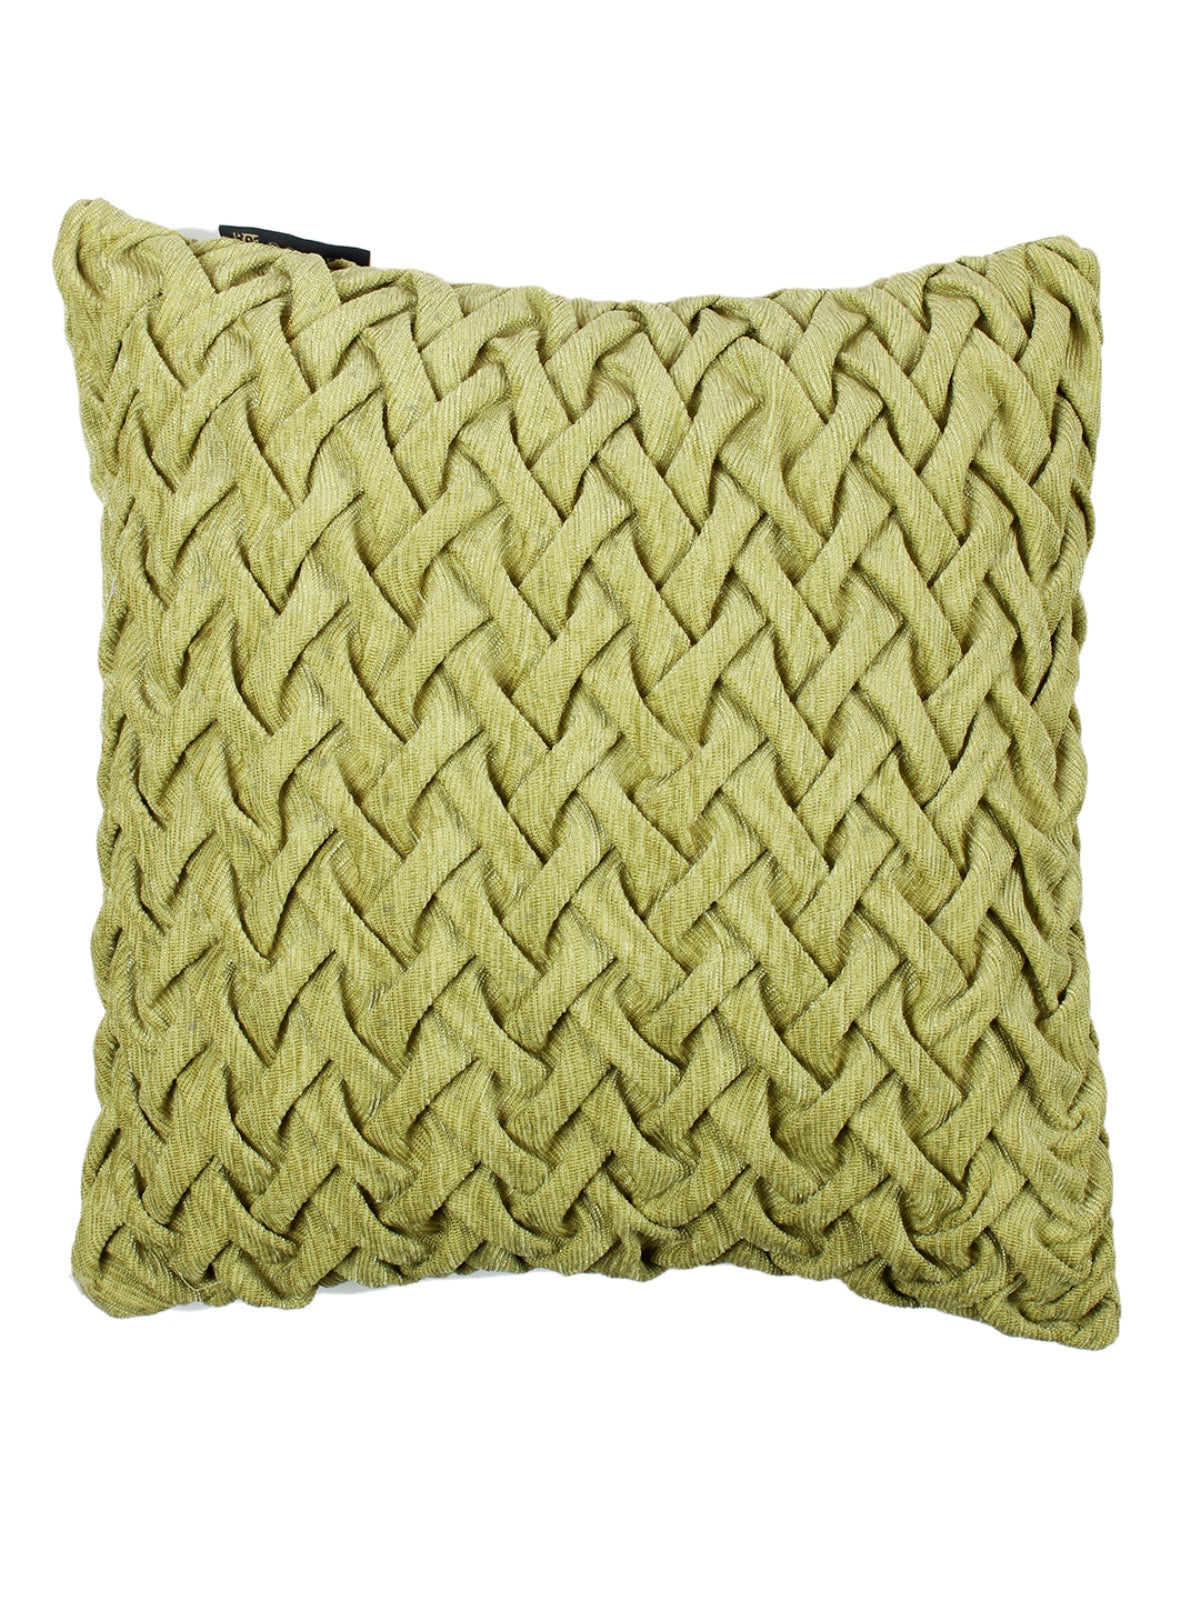 Soft Polyester Chenille Designer Plain Cushion Covers 16 inch x 16 inch Set of 3 - Green